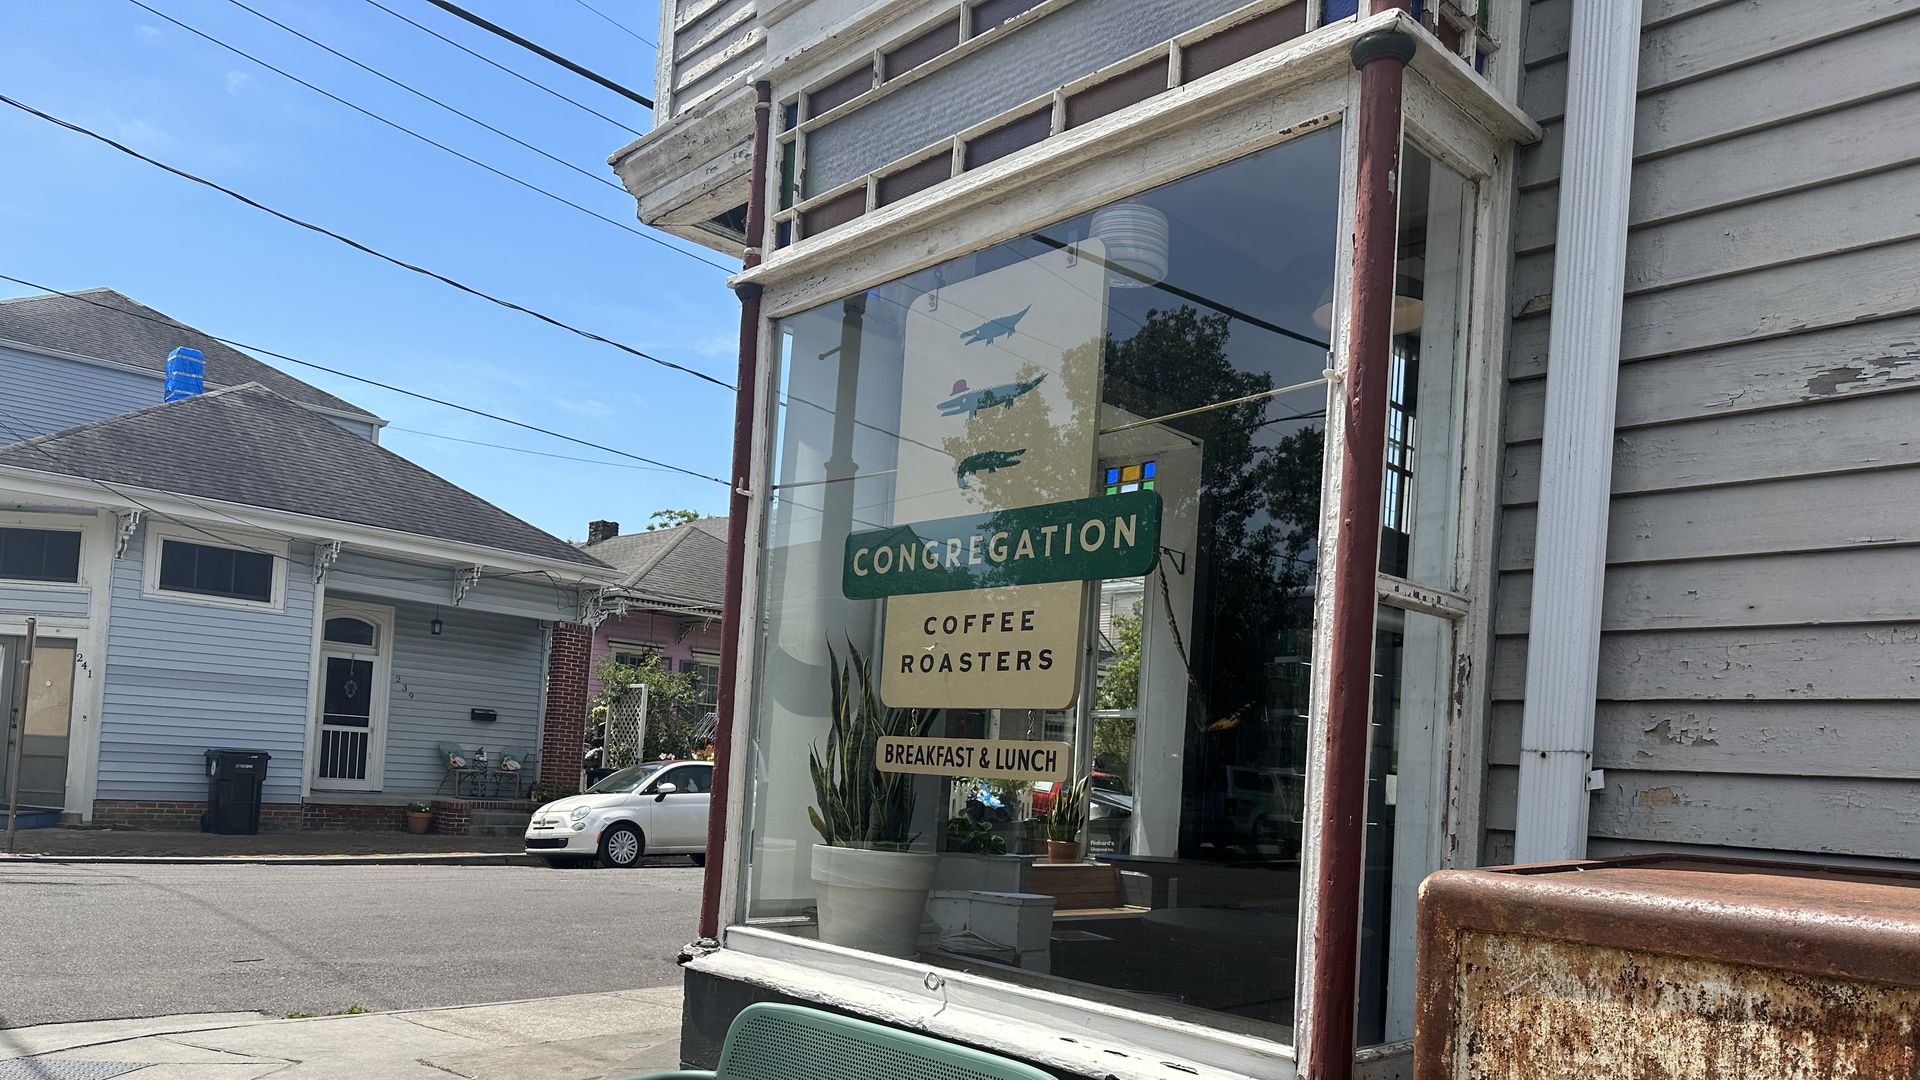 The front window of Congregation Coffee is viewed on a sunny day. The shop's sign, which says Congregation Coffee Roasters: Breakfast and Lunch" and pictures three alligators, hangs in the window.